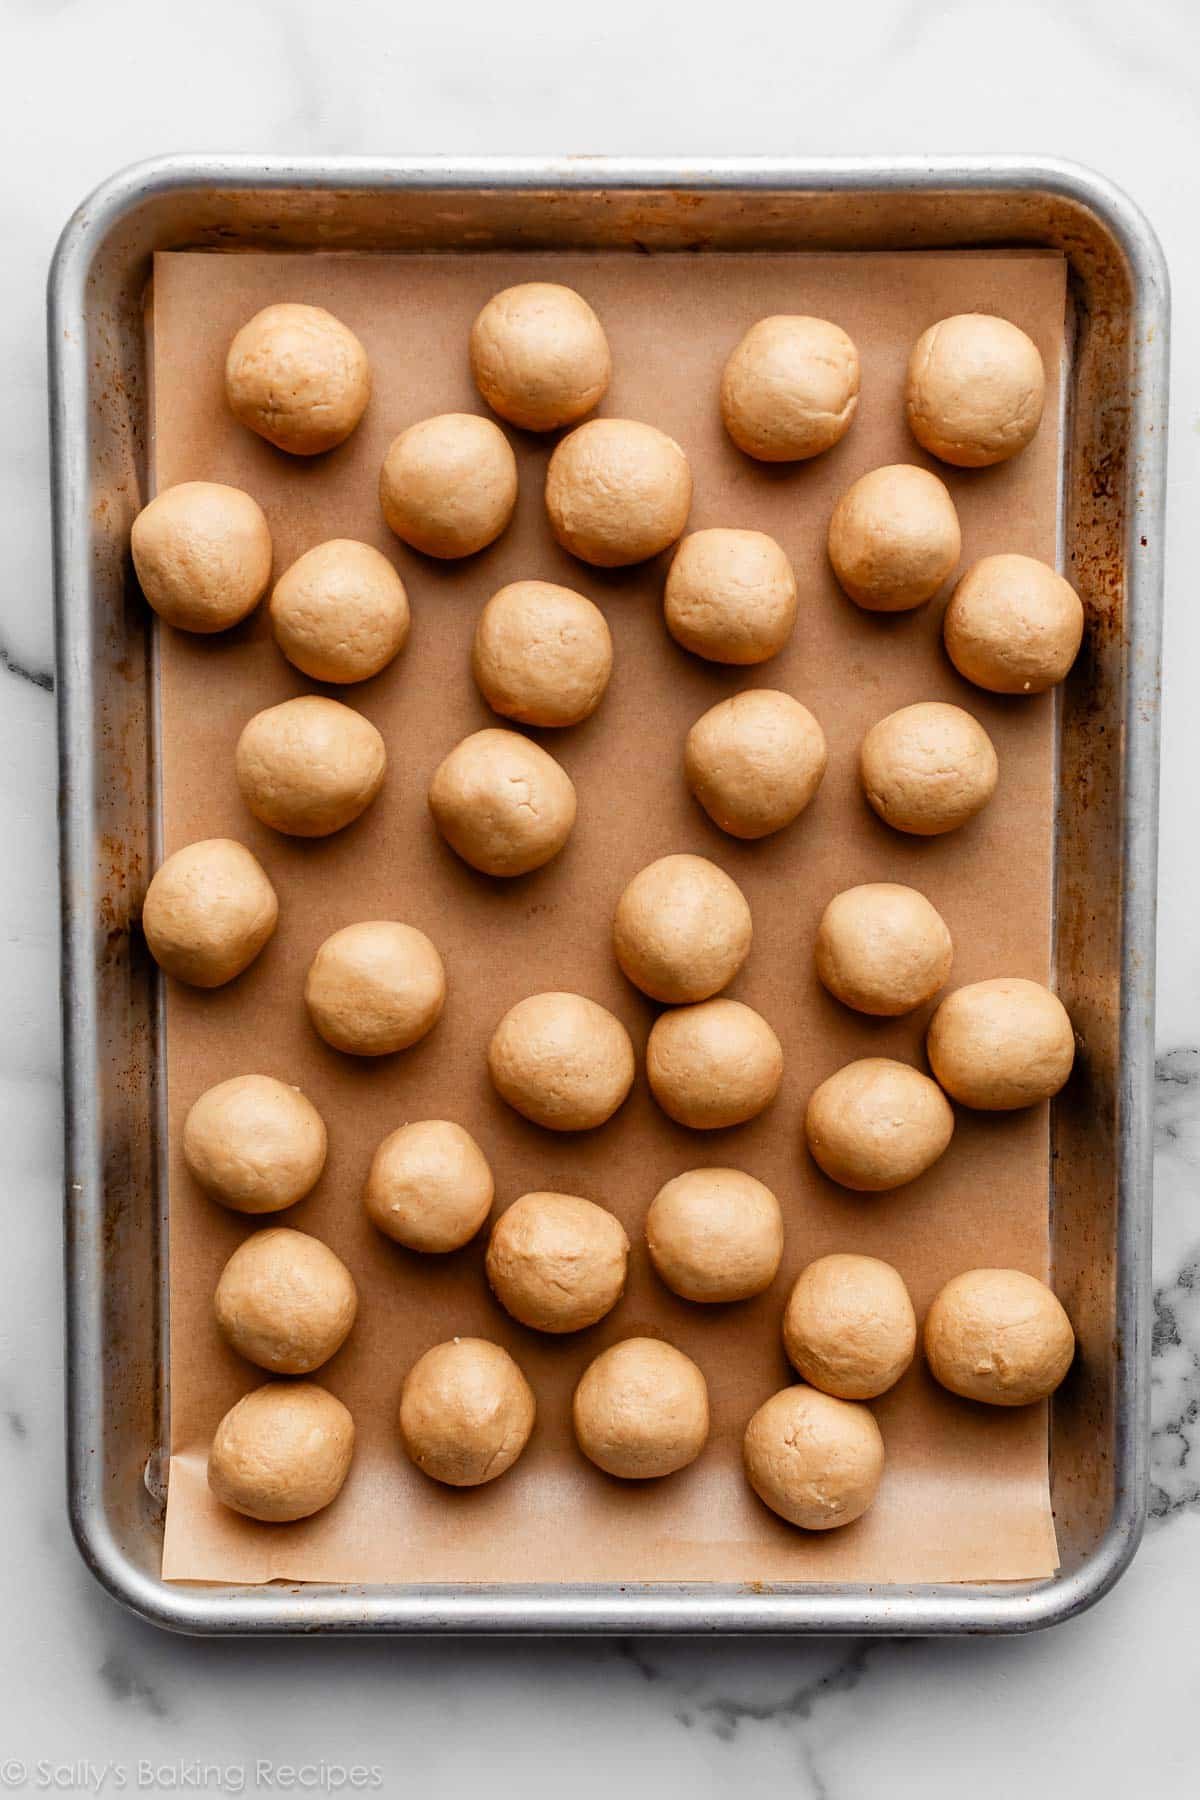 peanut butter dough mixture rolled into balls on lined baking sheet.